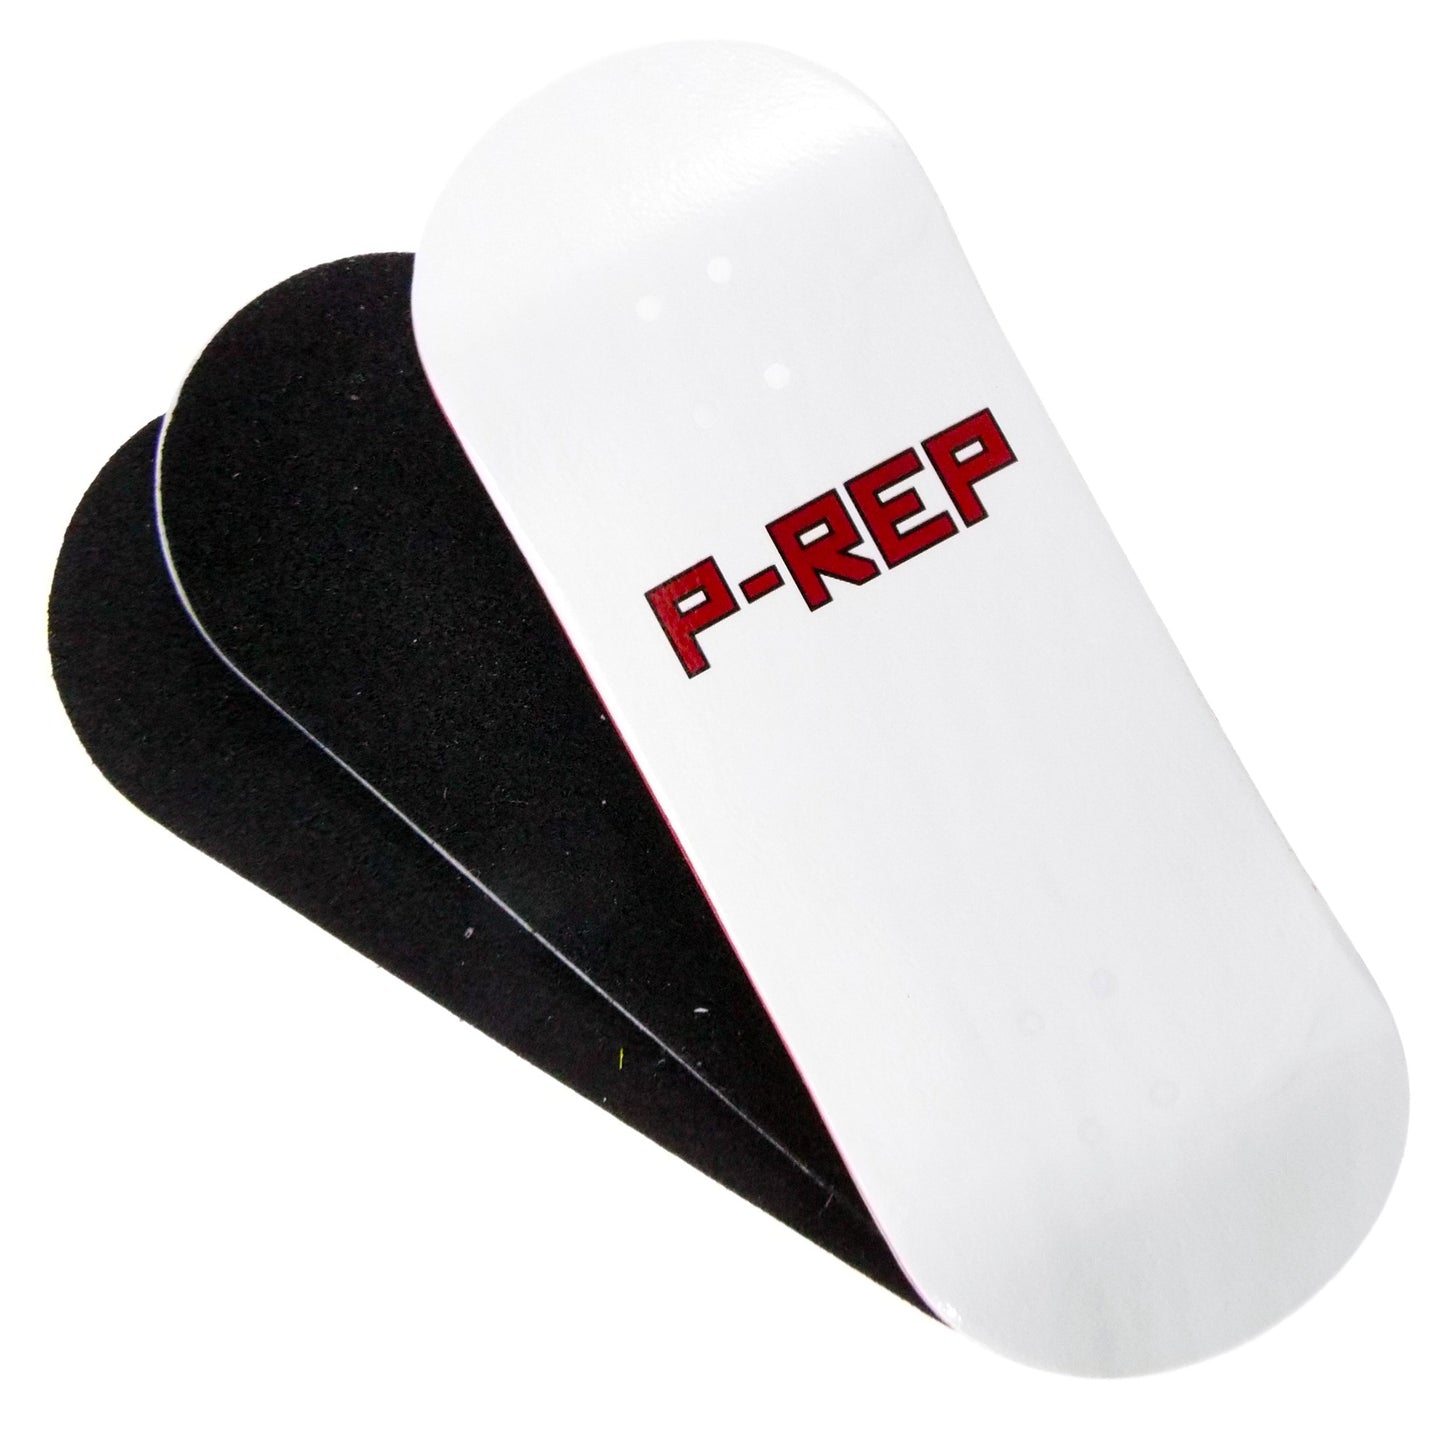 P-REP  34mm x 97mm Graphic Deck - FP